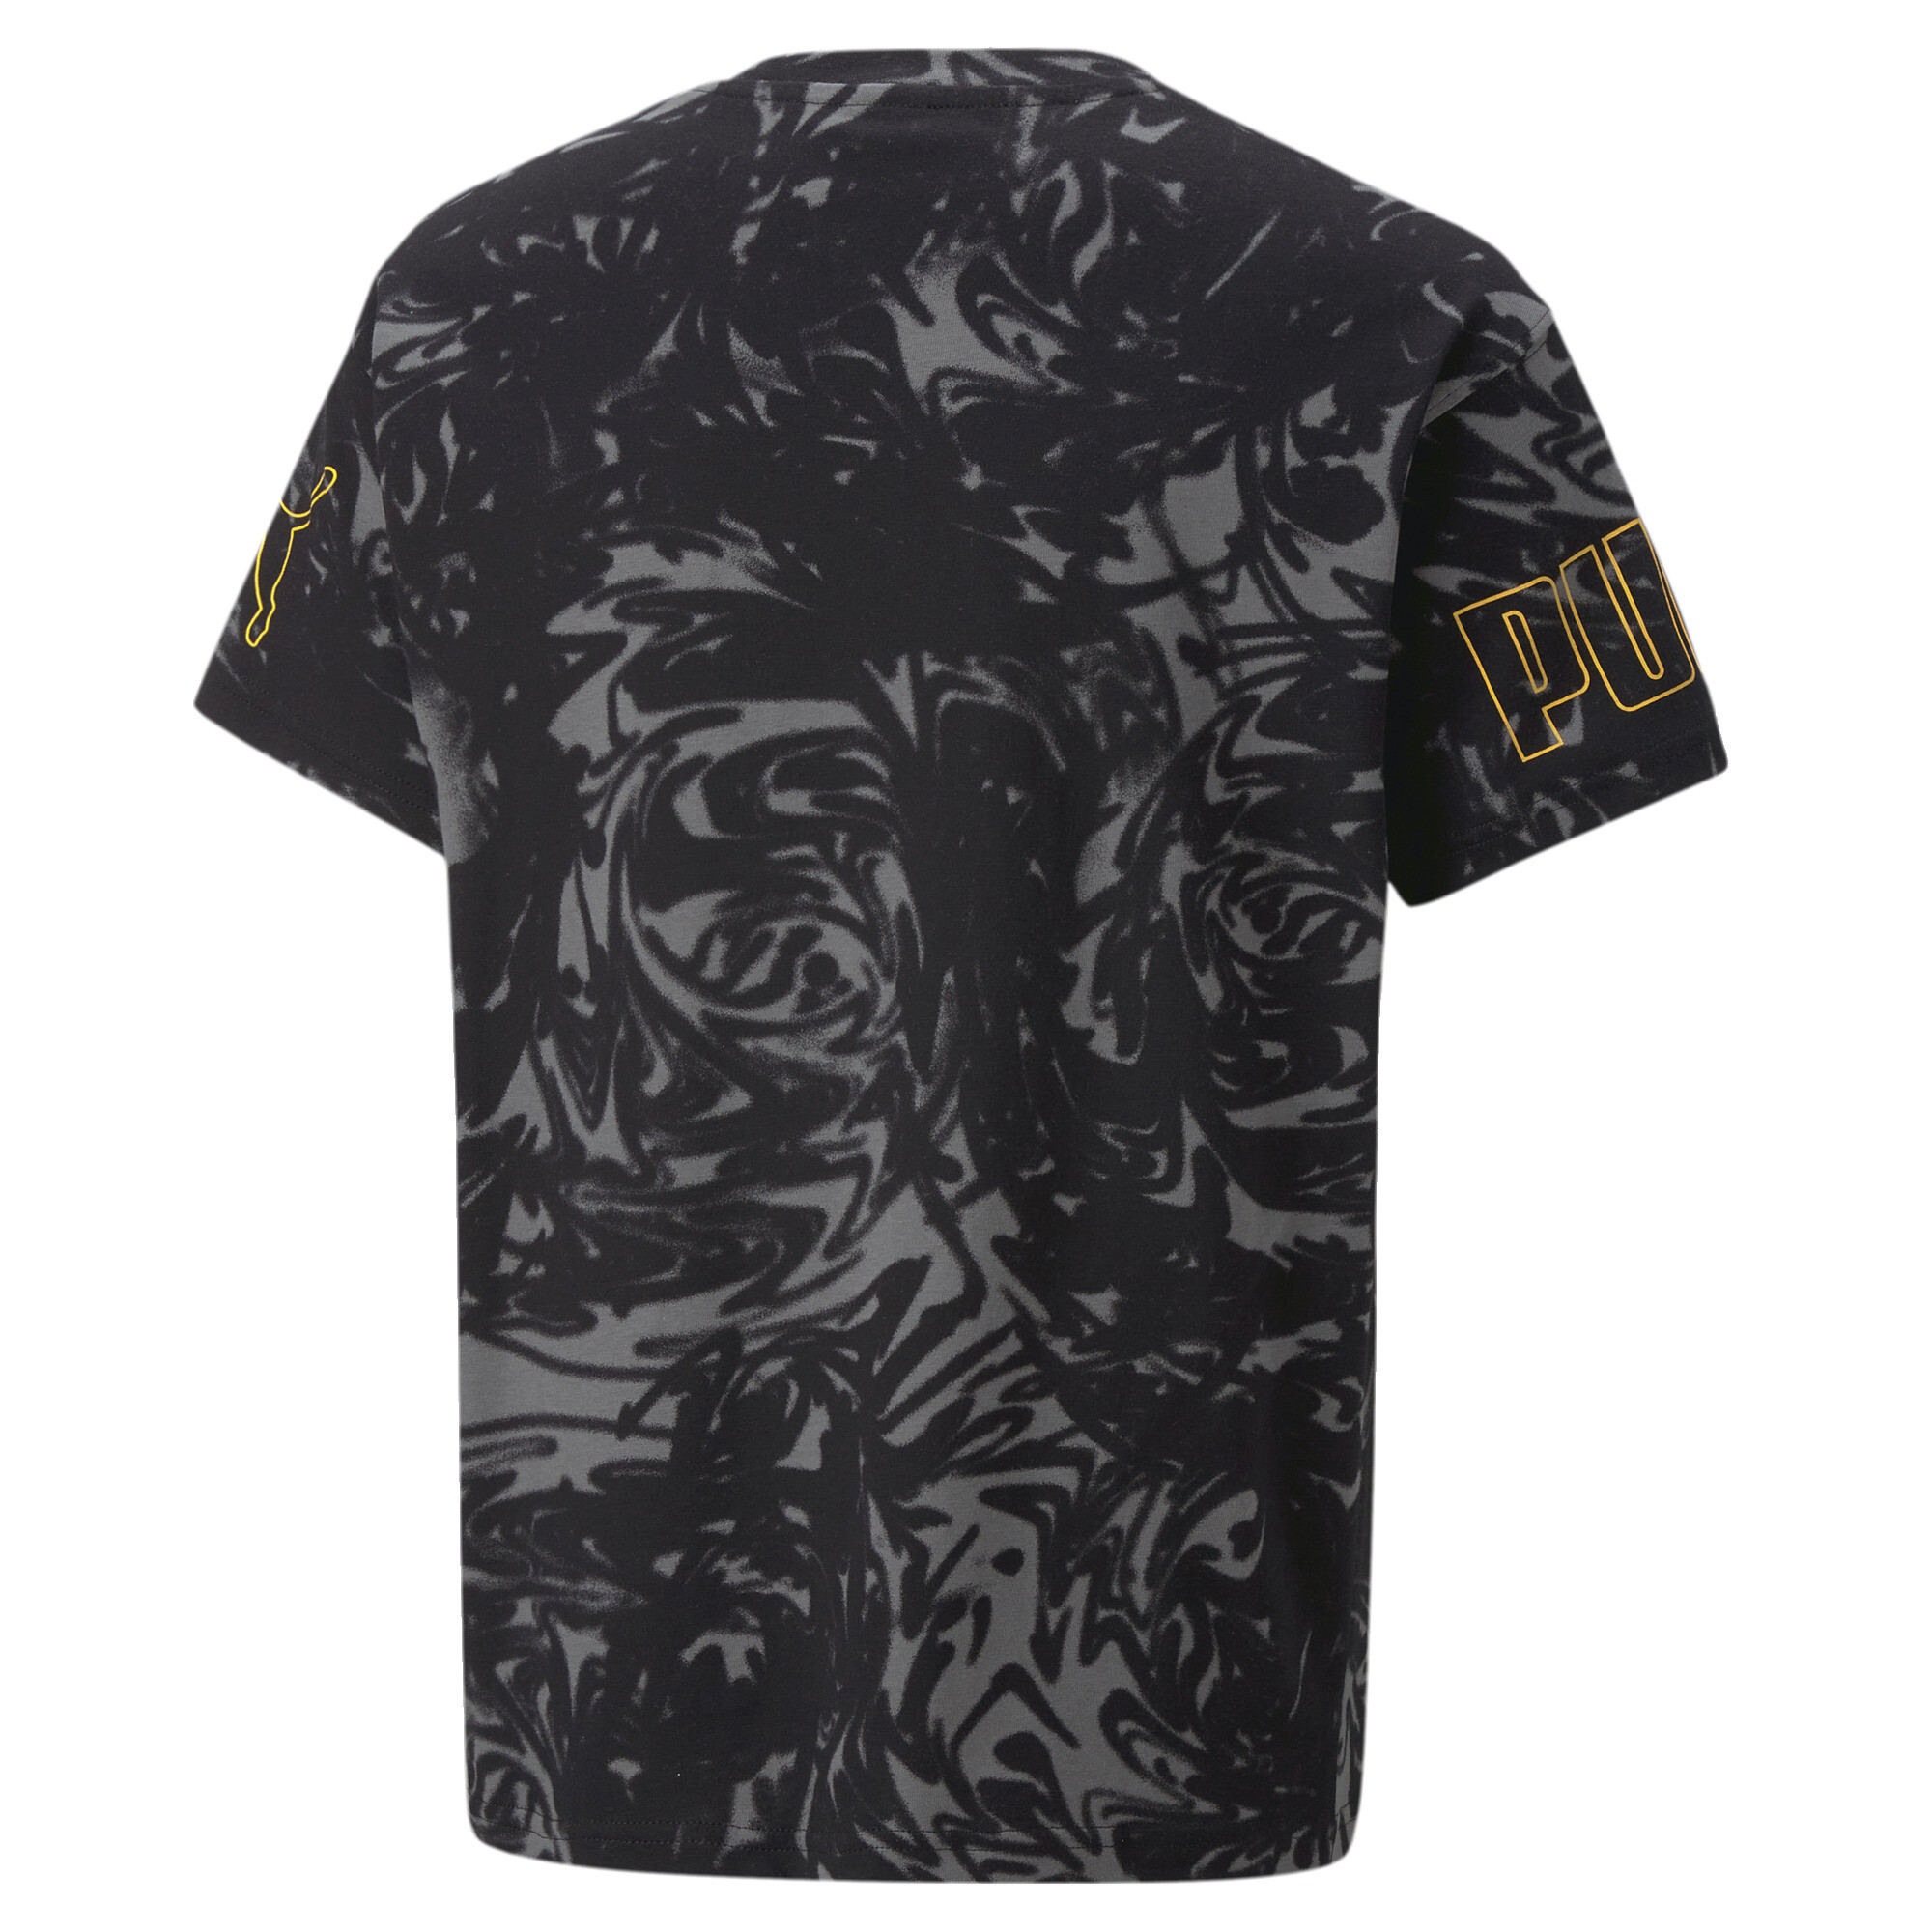 PUMA POWER SUMMER Printed T-Shirt In Black, Size 13-14 Youth